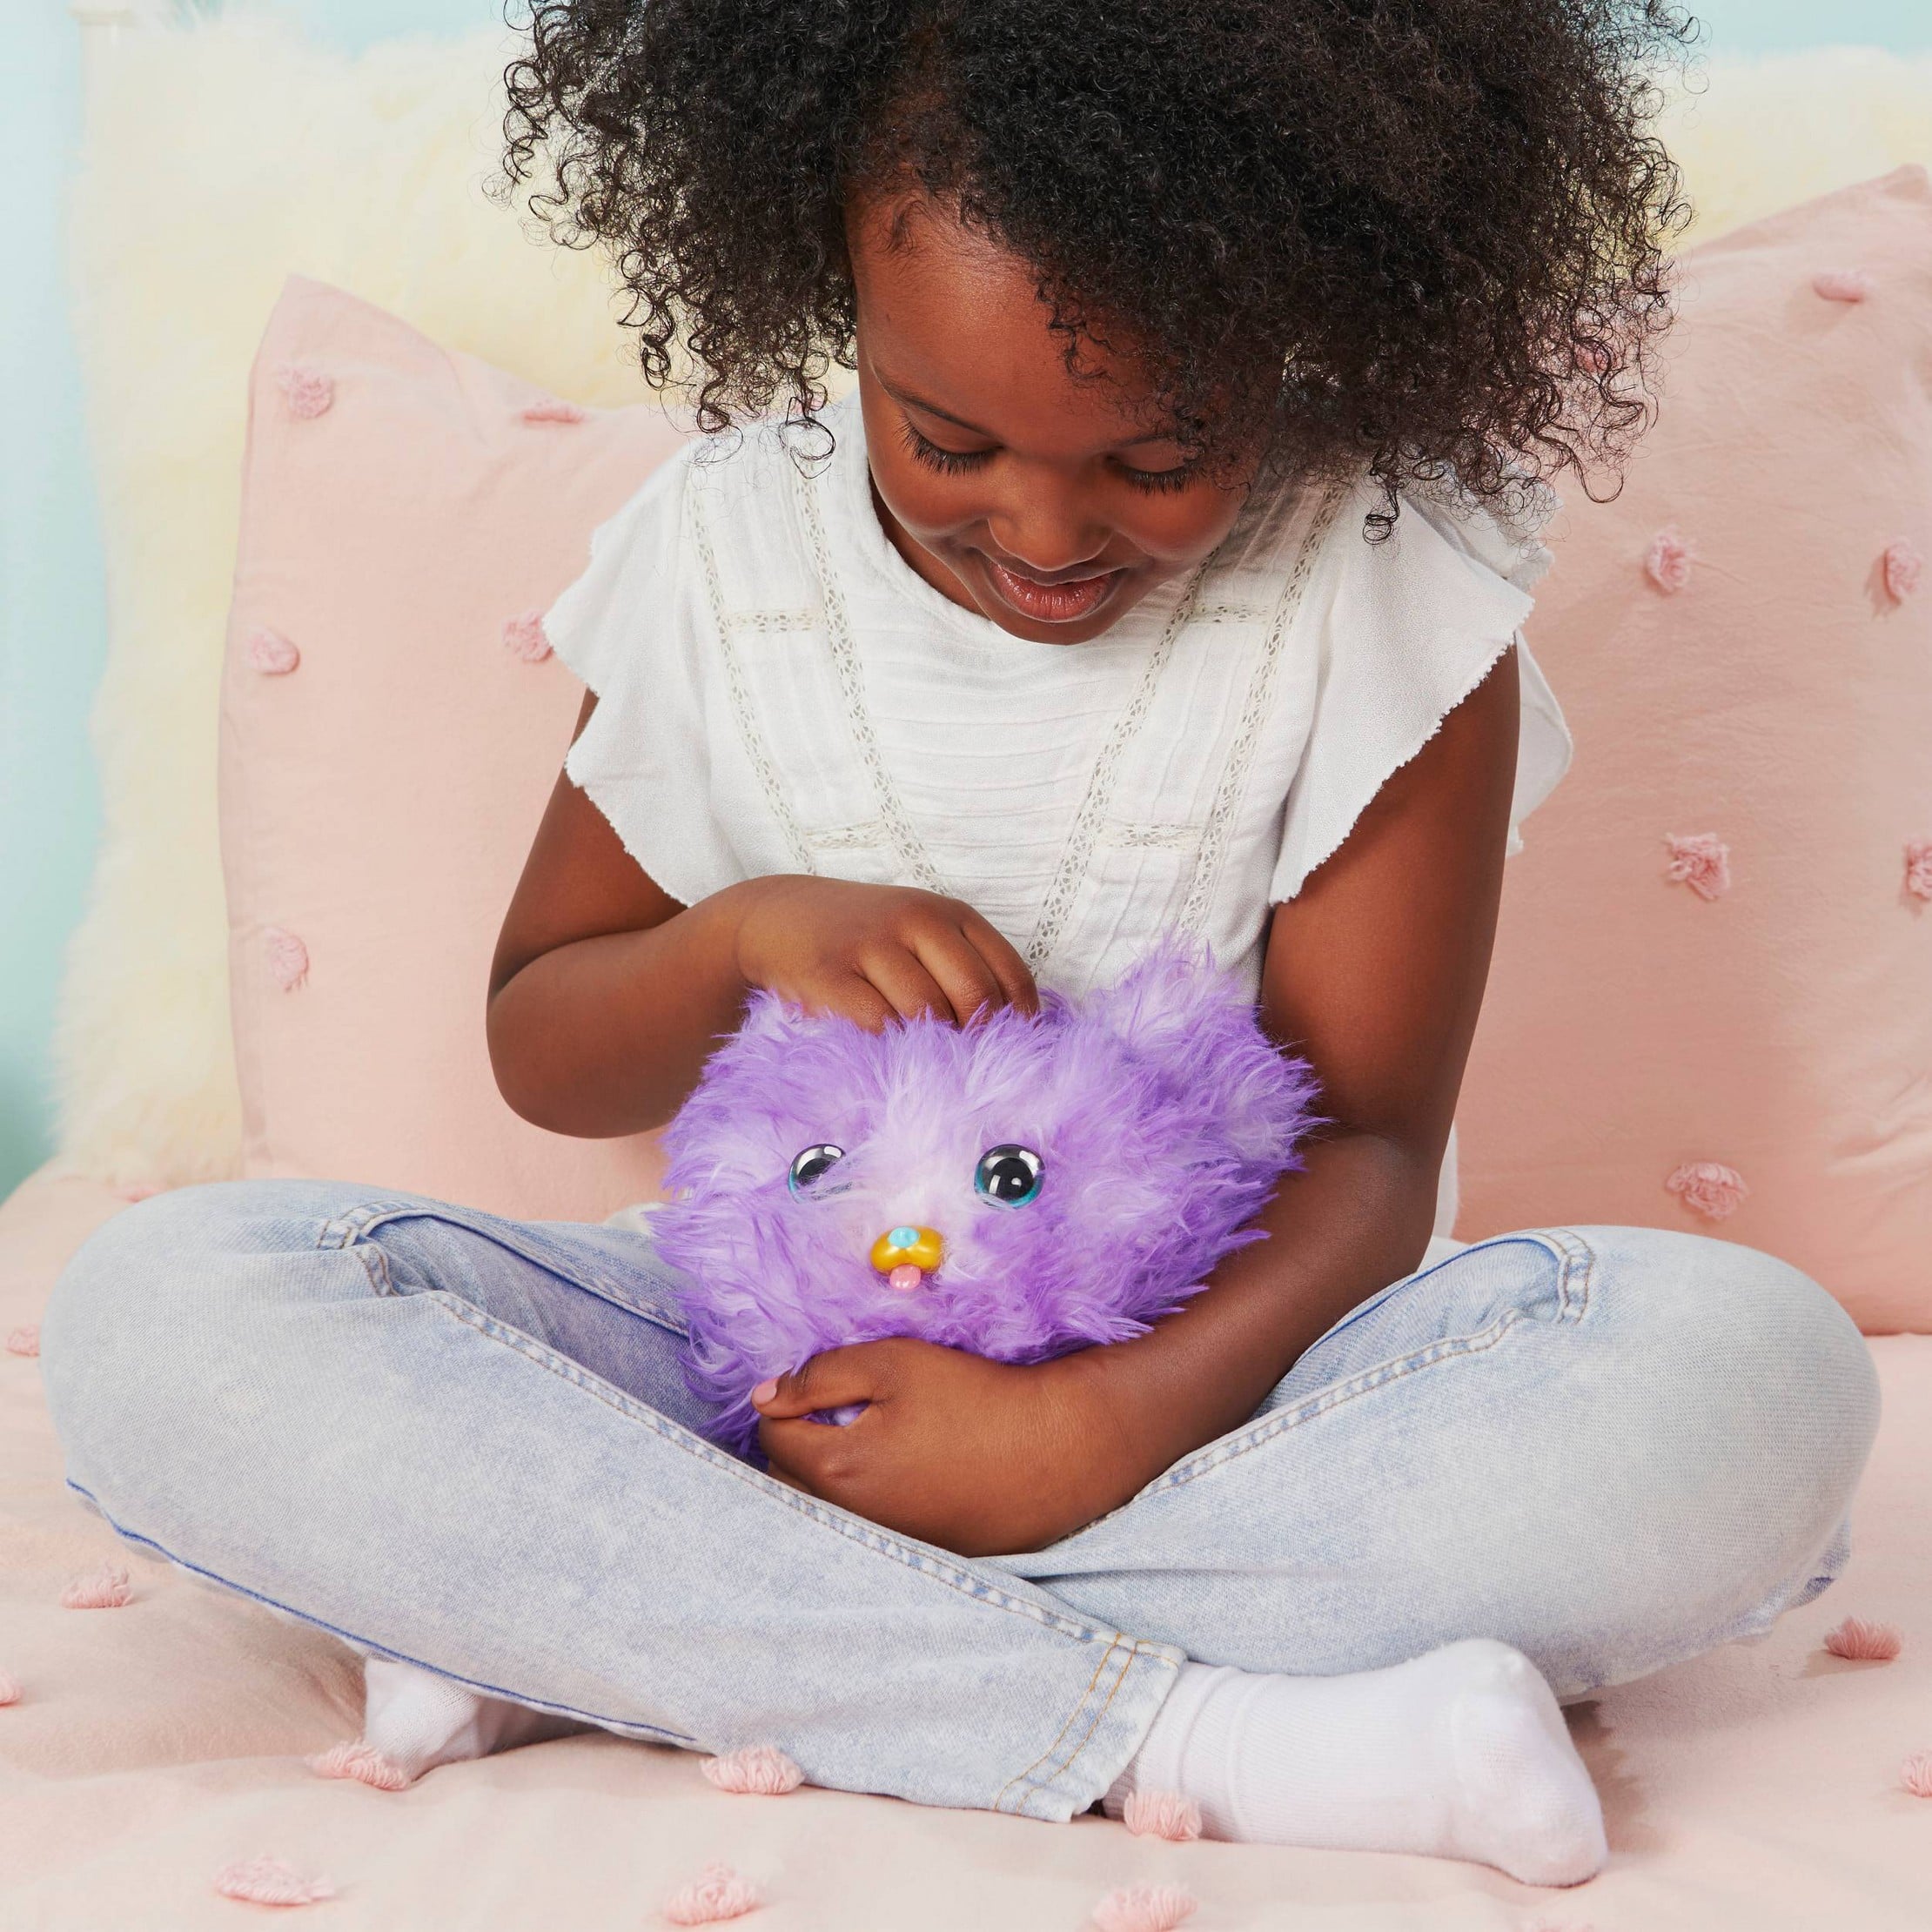 16 of the hottest toys for kids in 2021 that parents should buy